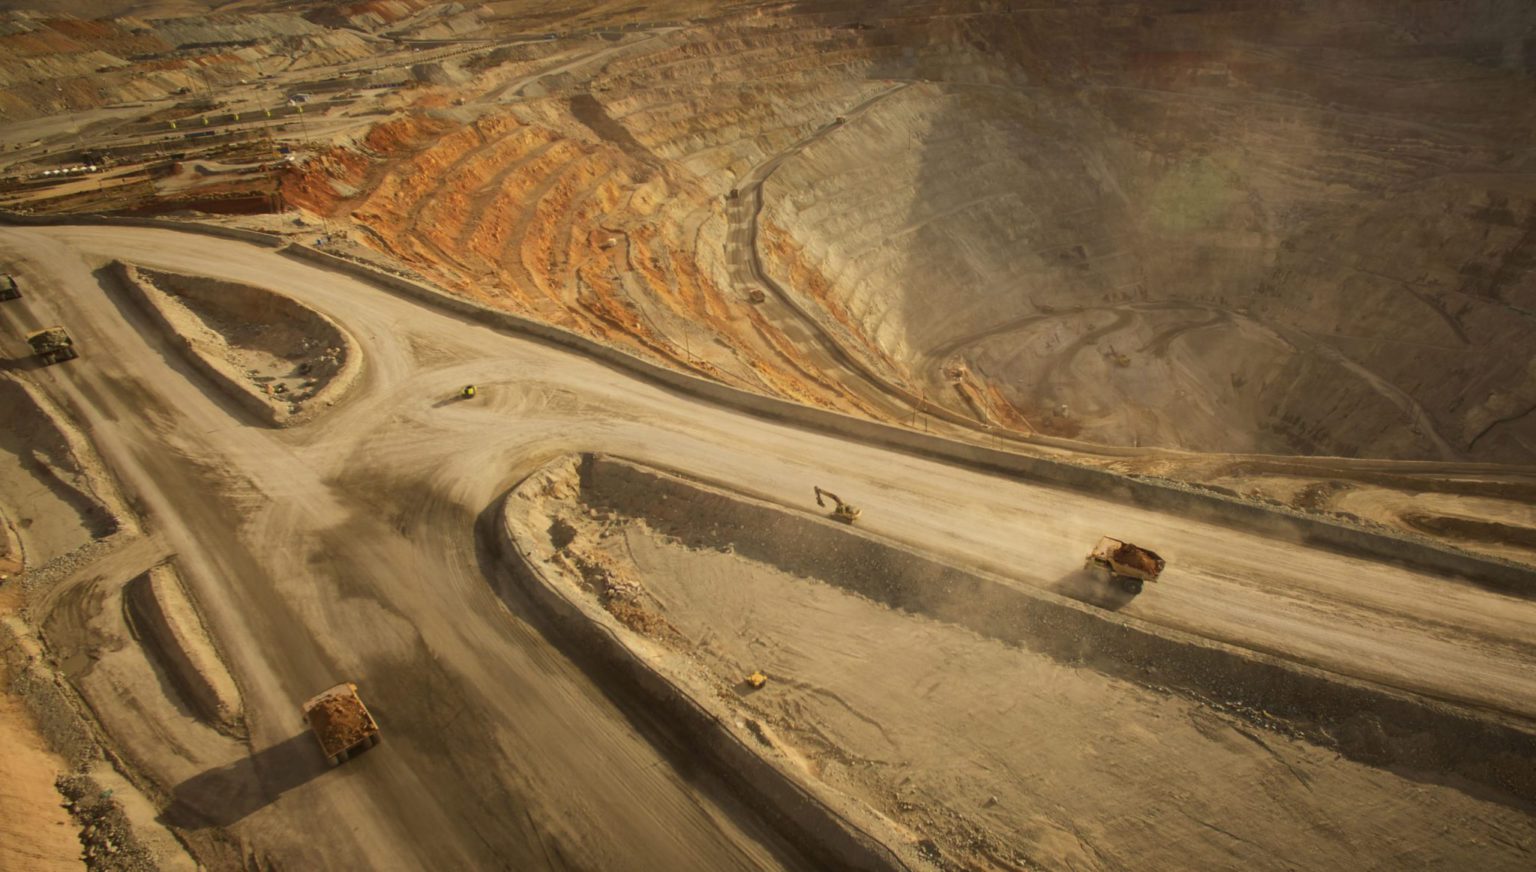 Peruvian government to negotiate with communities opposing Glencore’s copper project